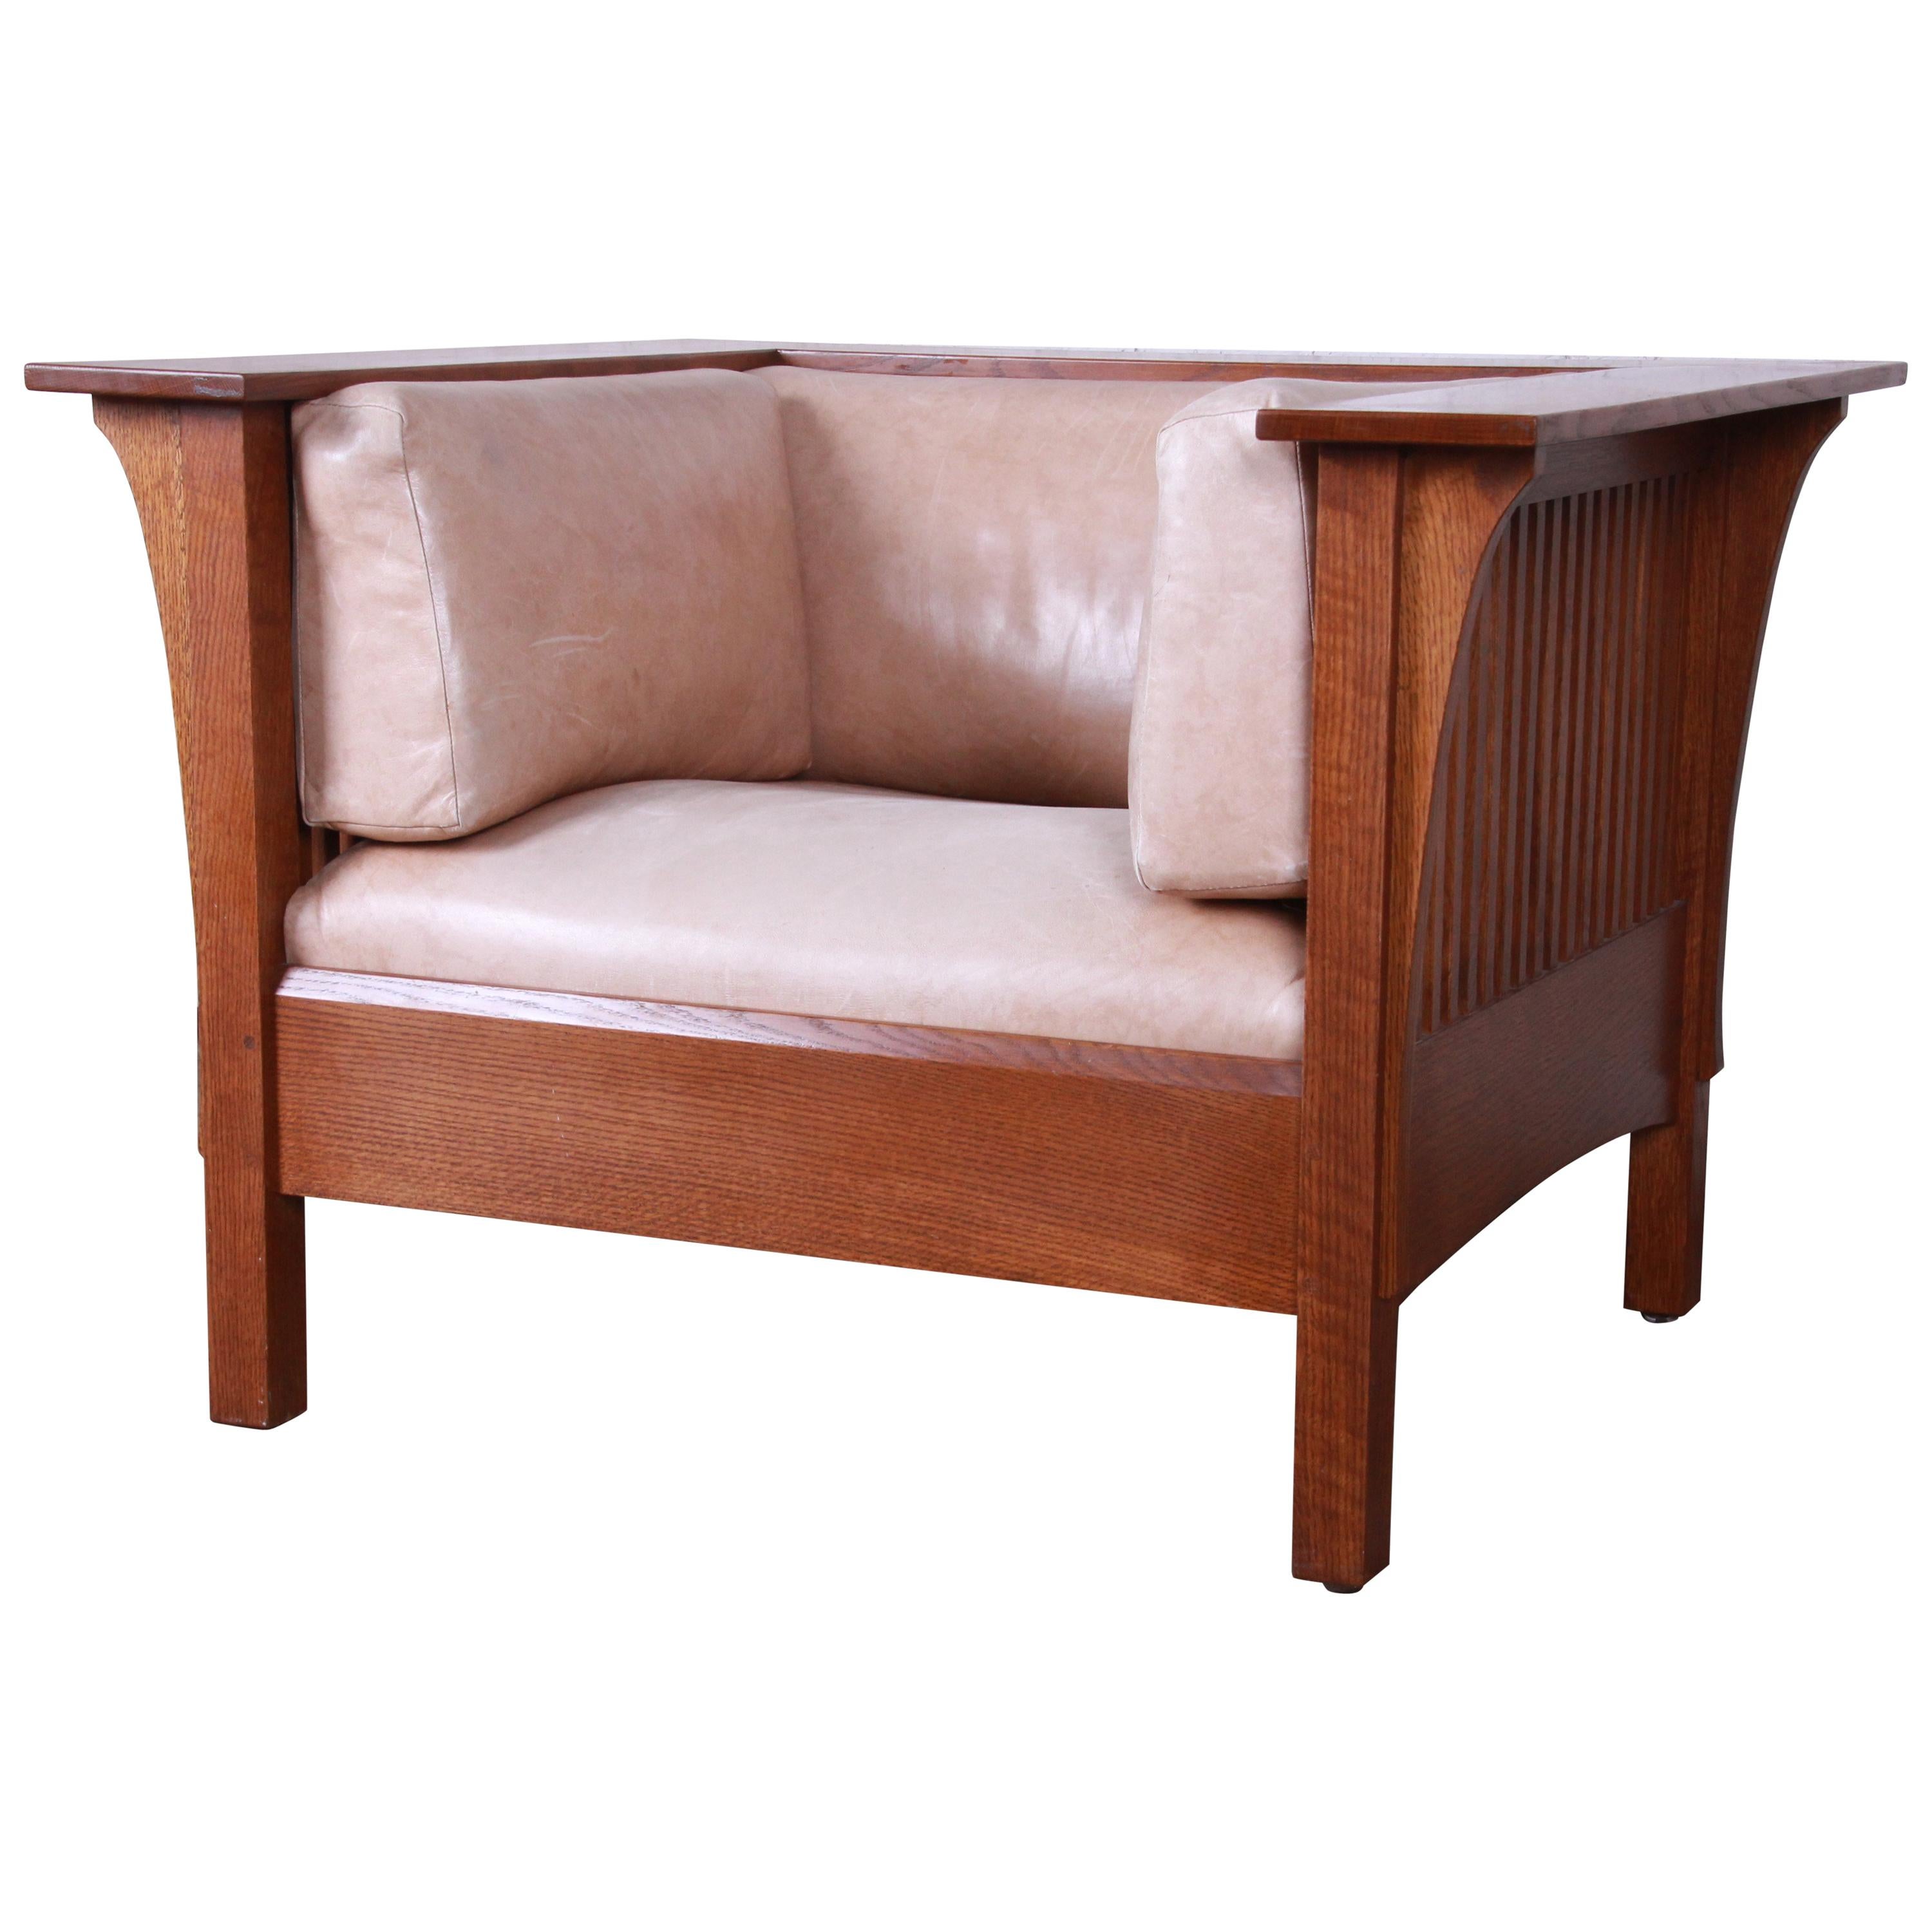 Stickley Mission Prairie Armchair with Tan Leather Upholstery